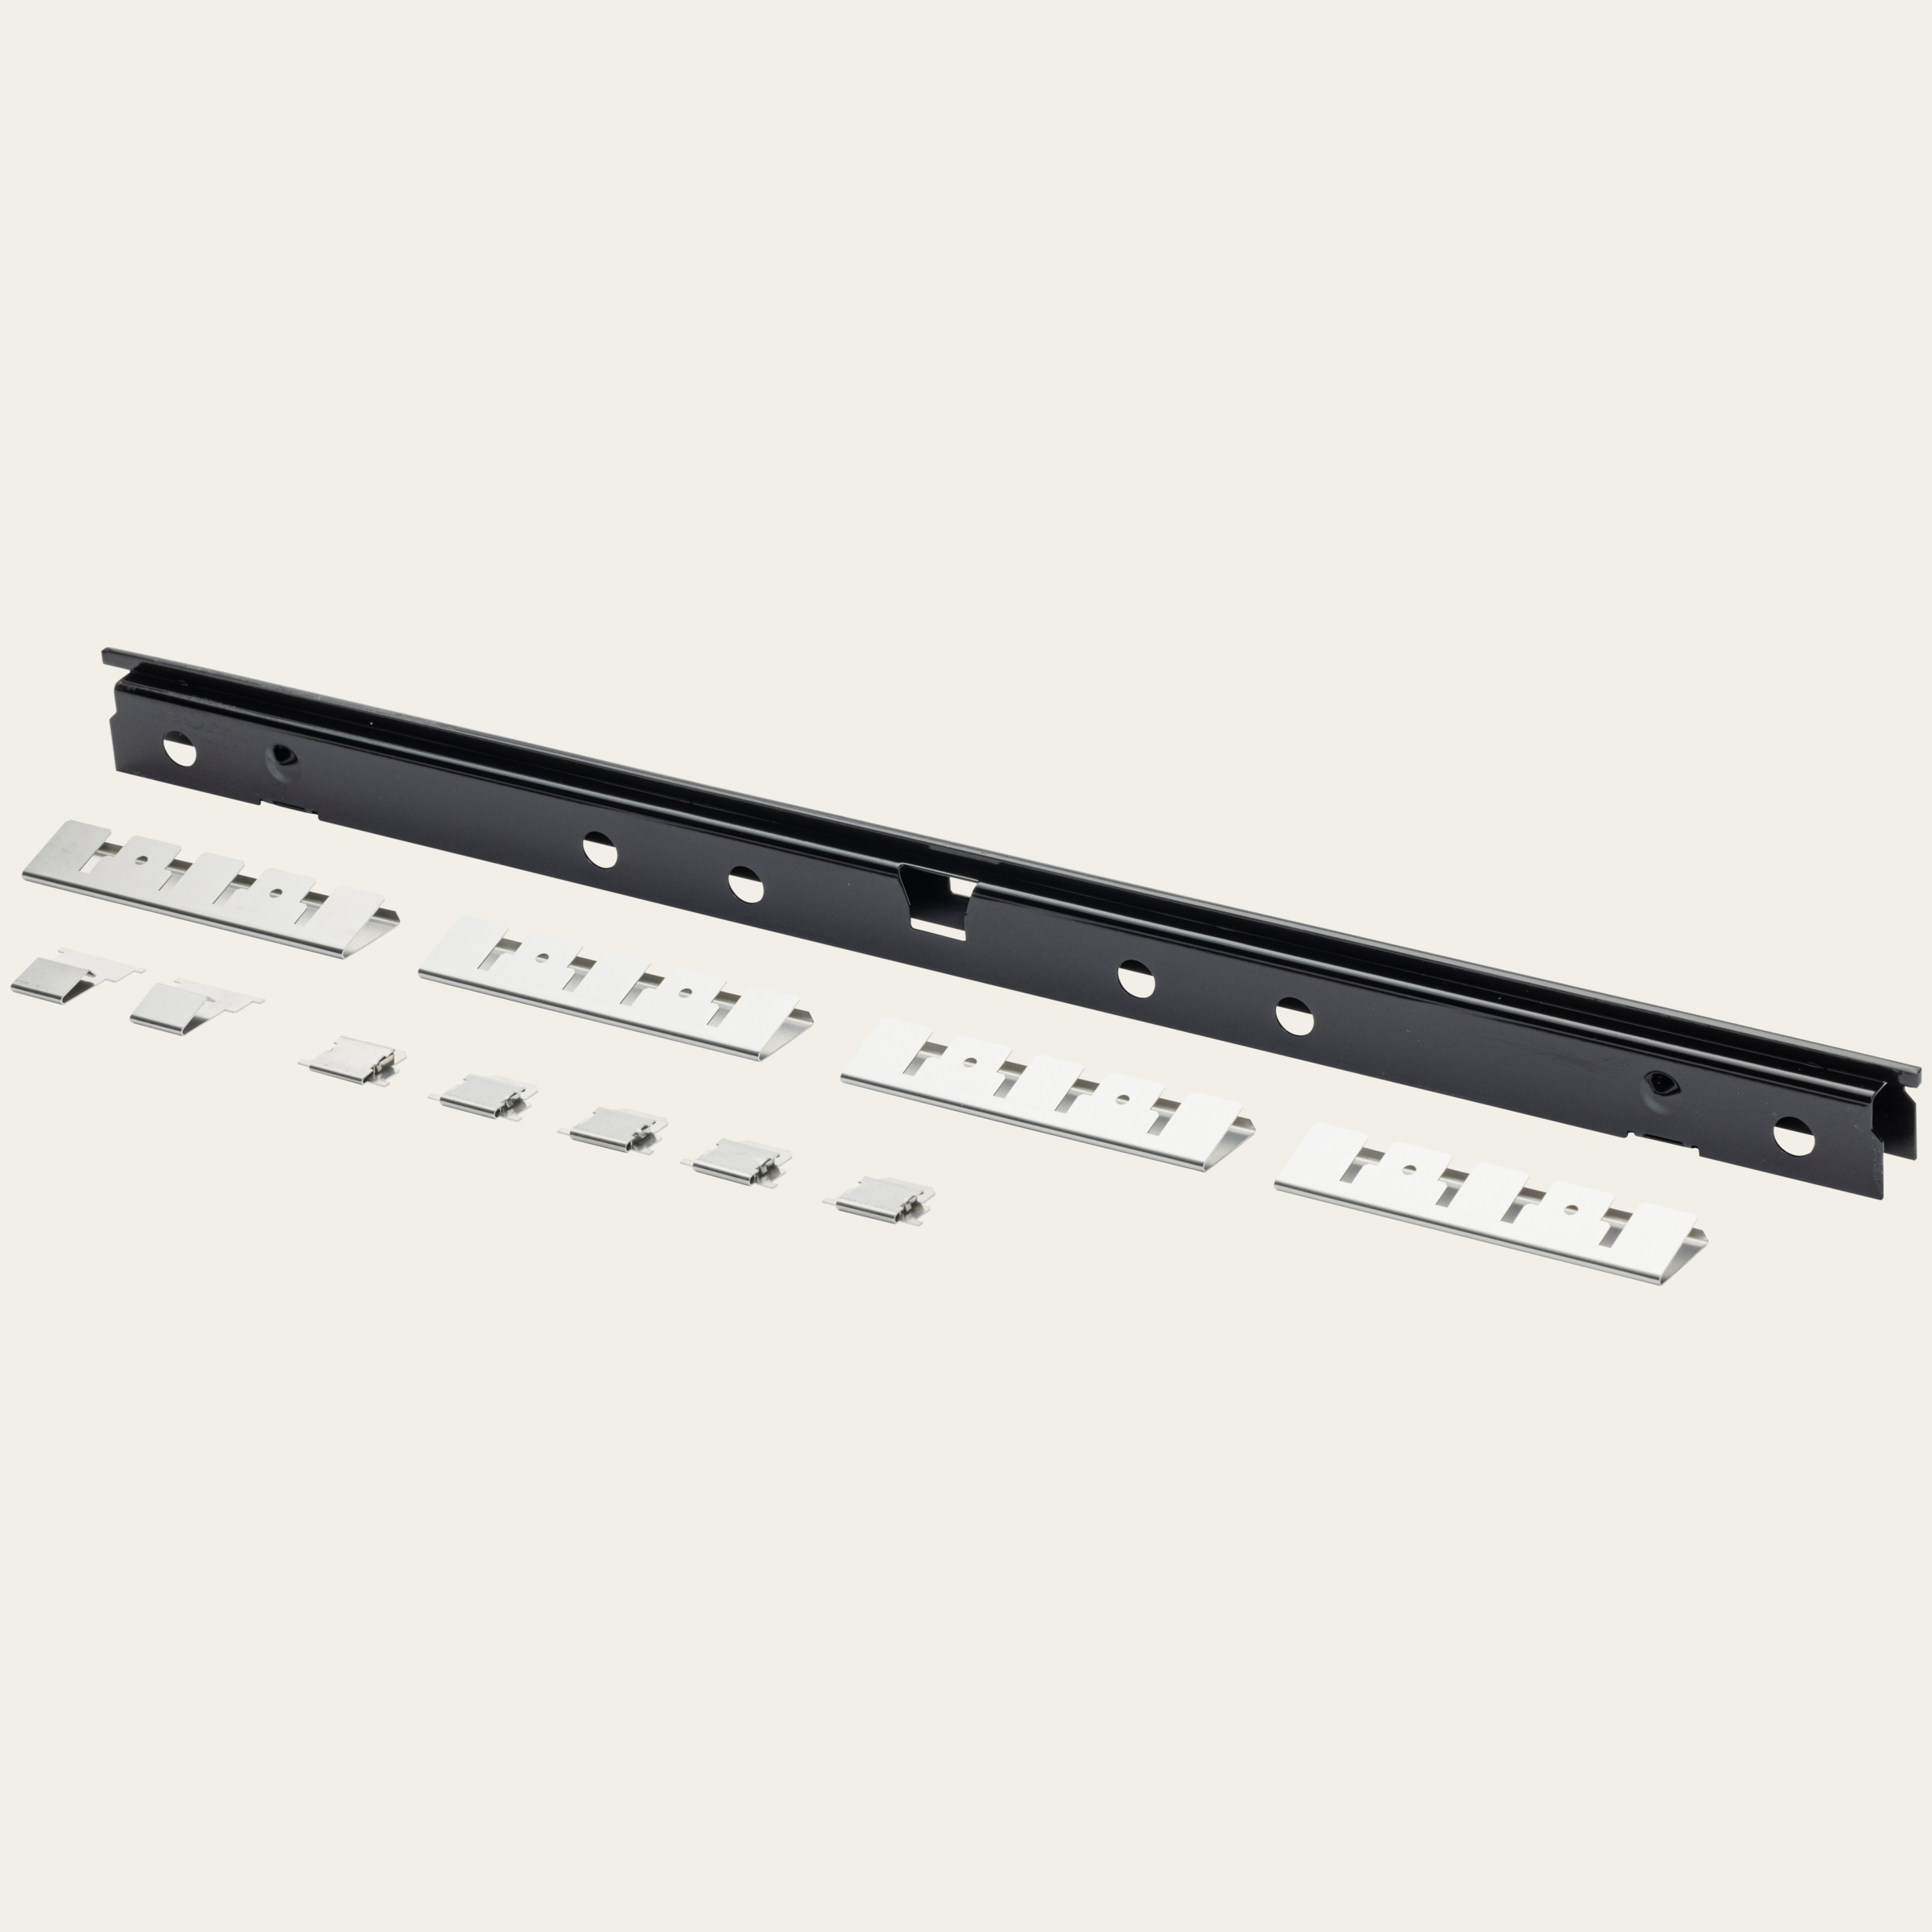 Combination base kit for hob combinations, surface-mounted black (1 piece)